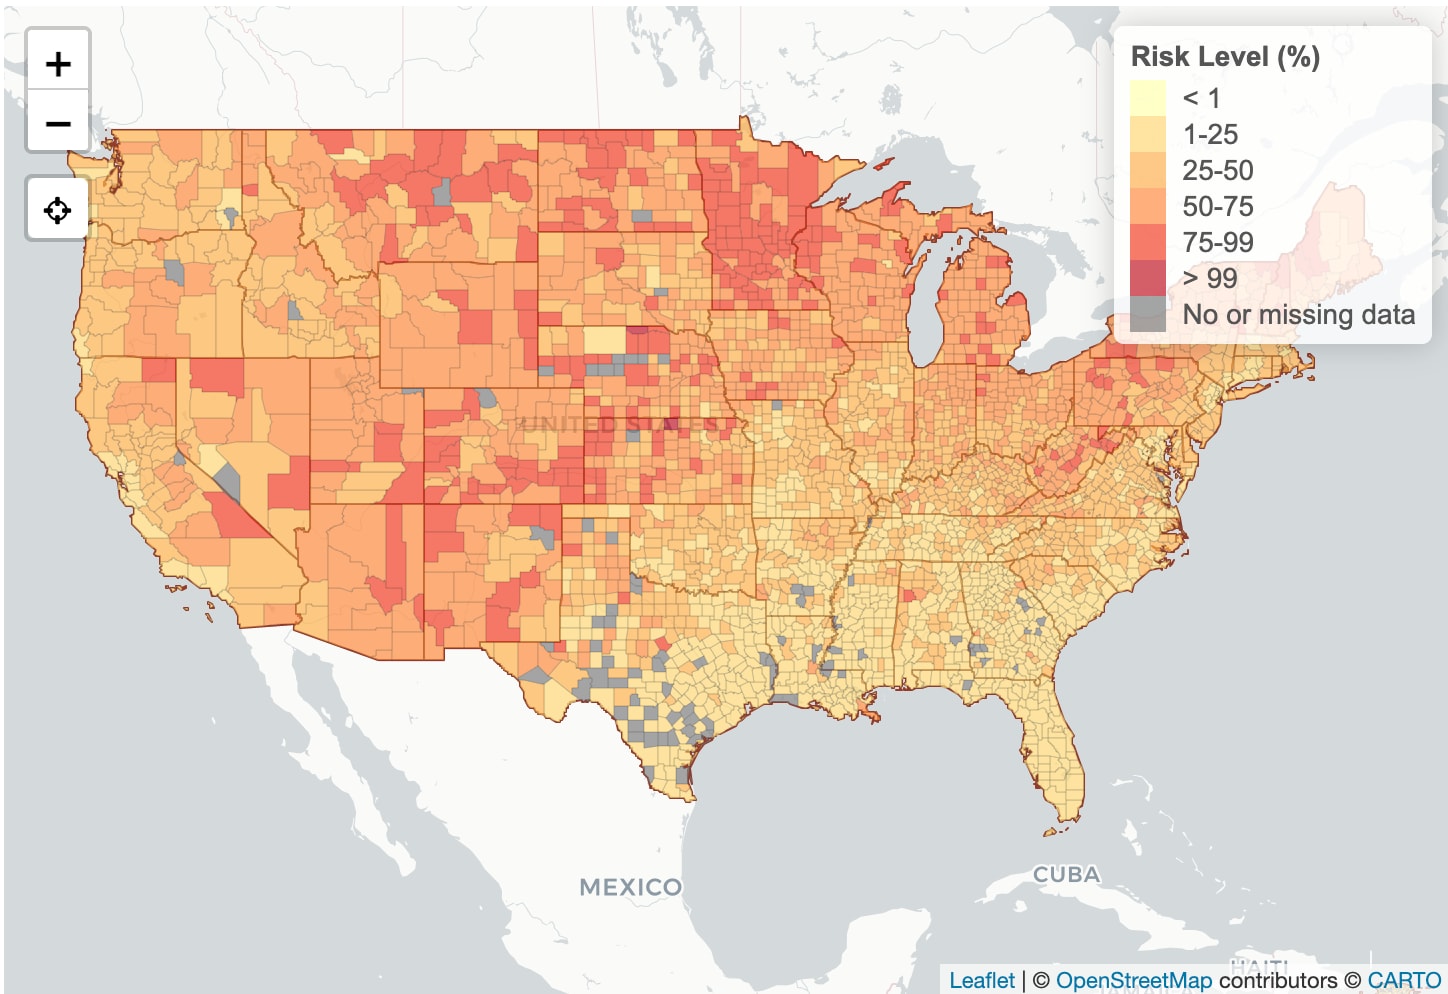 Interactive COVID risk map gauges likelihood of exposure based on location and event size